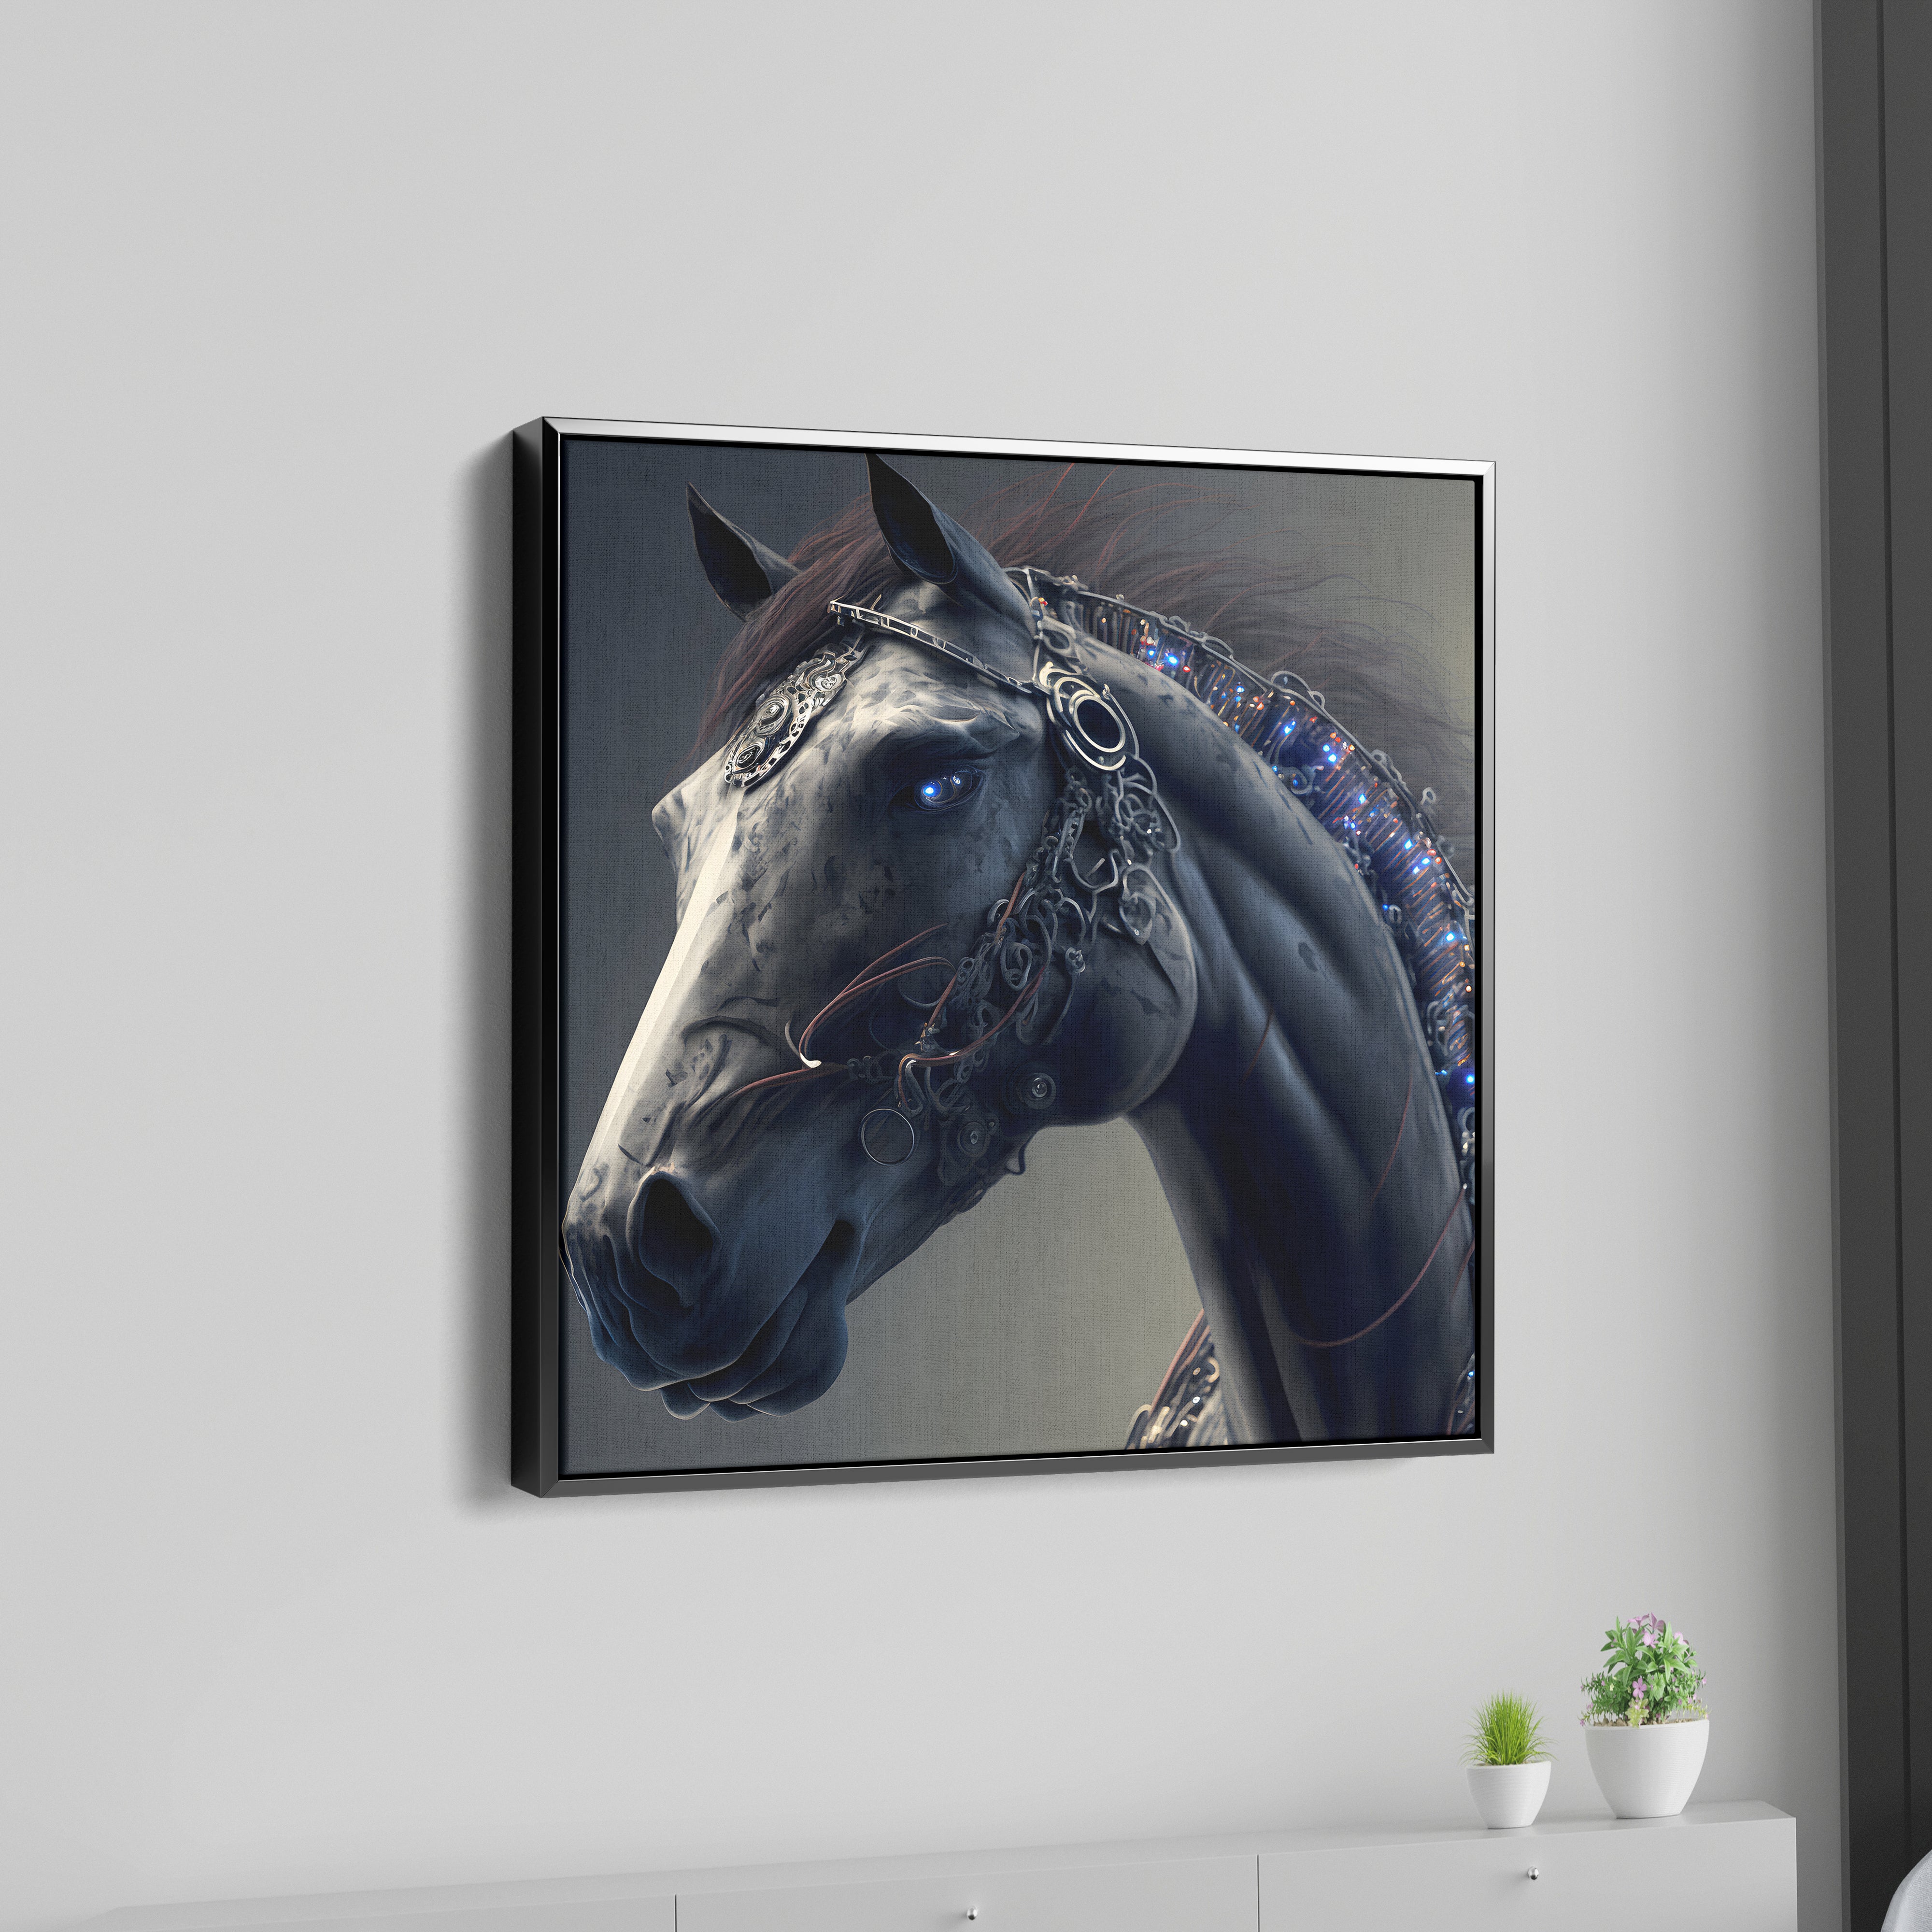 Black Robot Horse Canvas Wall Painting